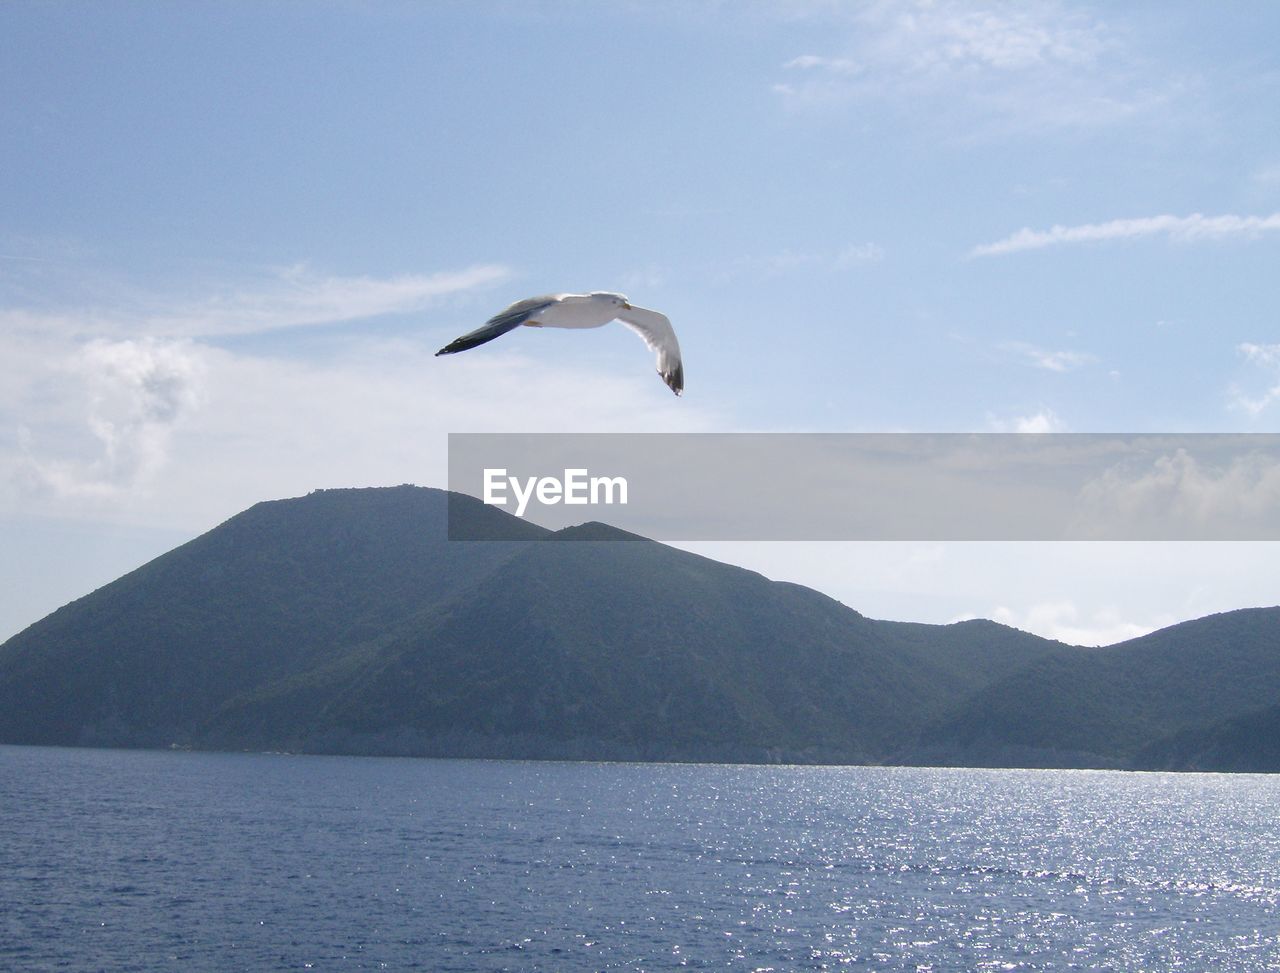 SEAGULL FLYING OVER SEA AGAINST MOUNTAIN